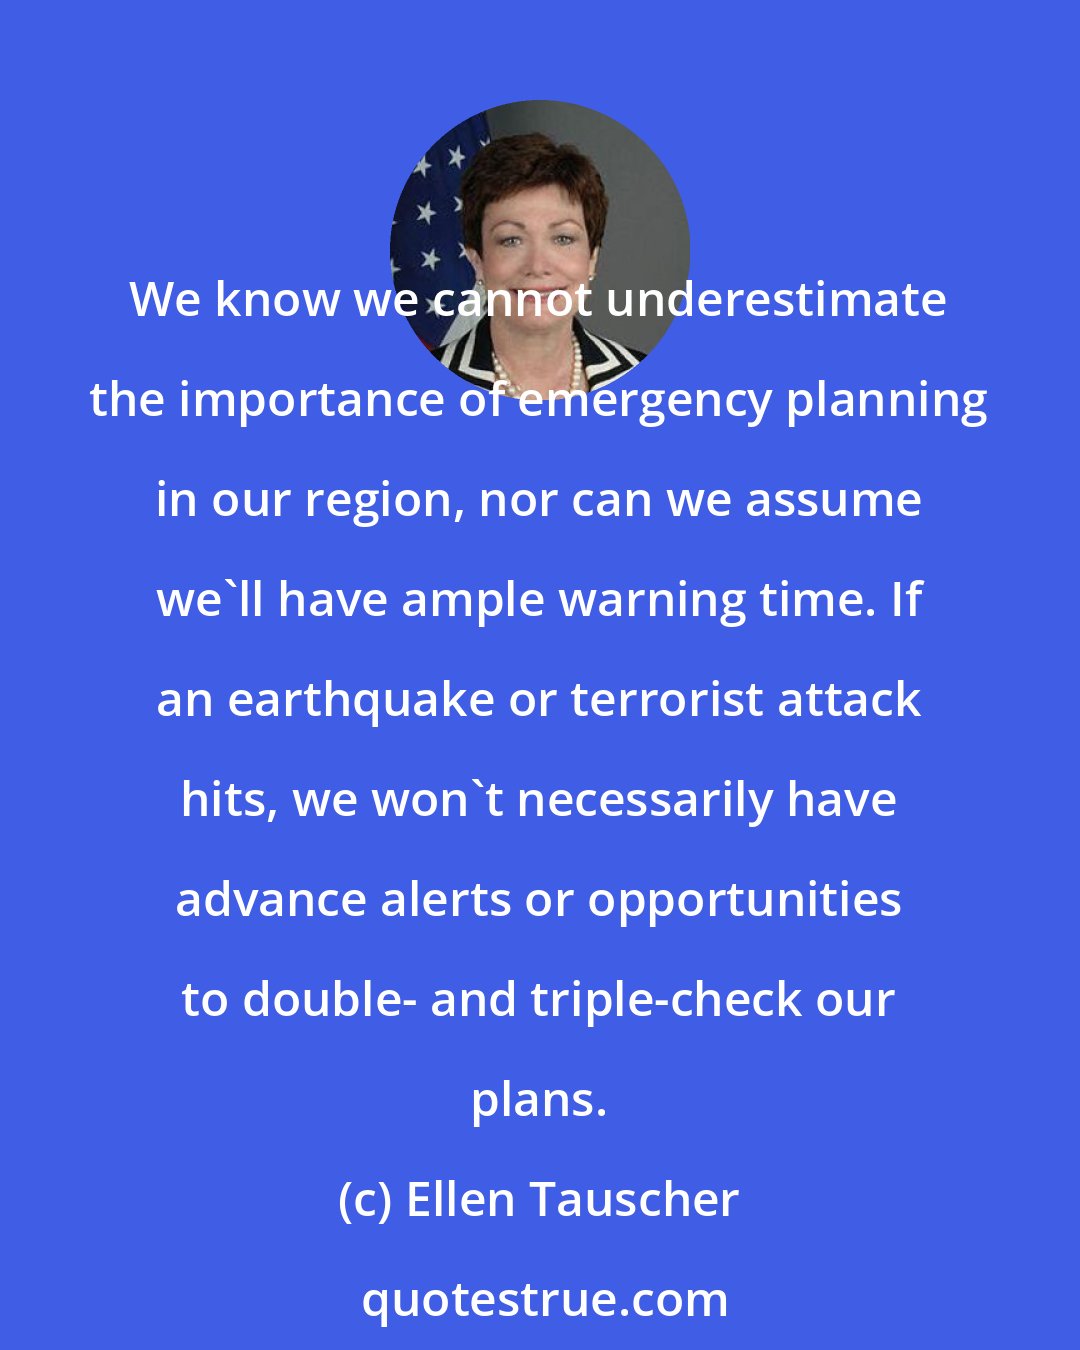 Ellen Tauscher: We know we cannot underestimate the importance of emergency planning in our region, nor can we assume we'll have ample warning time. If an earthquake or terrorist attack hits, we won't necessarily have advance alerts or opportunities to double- and triple-check our plans.